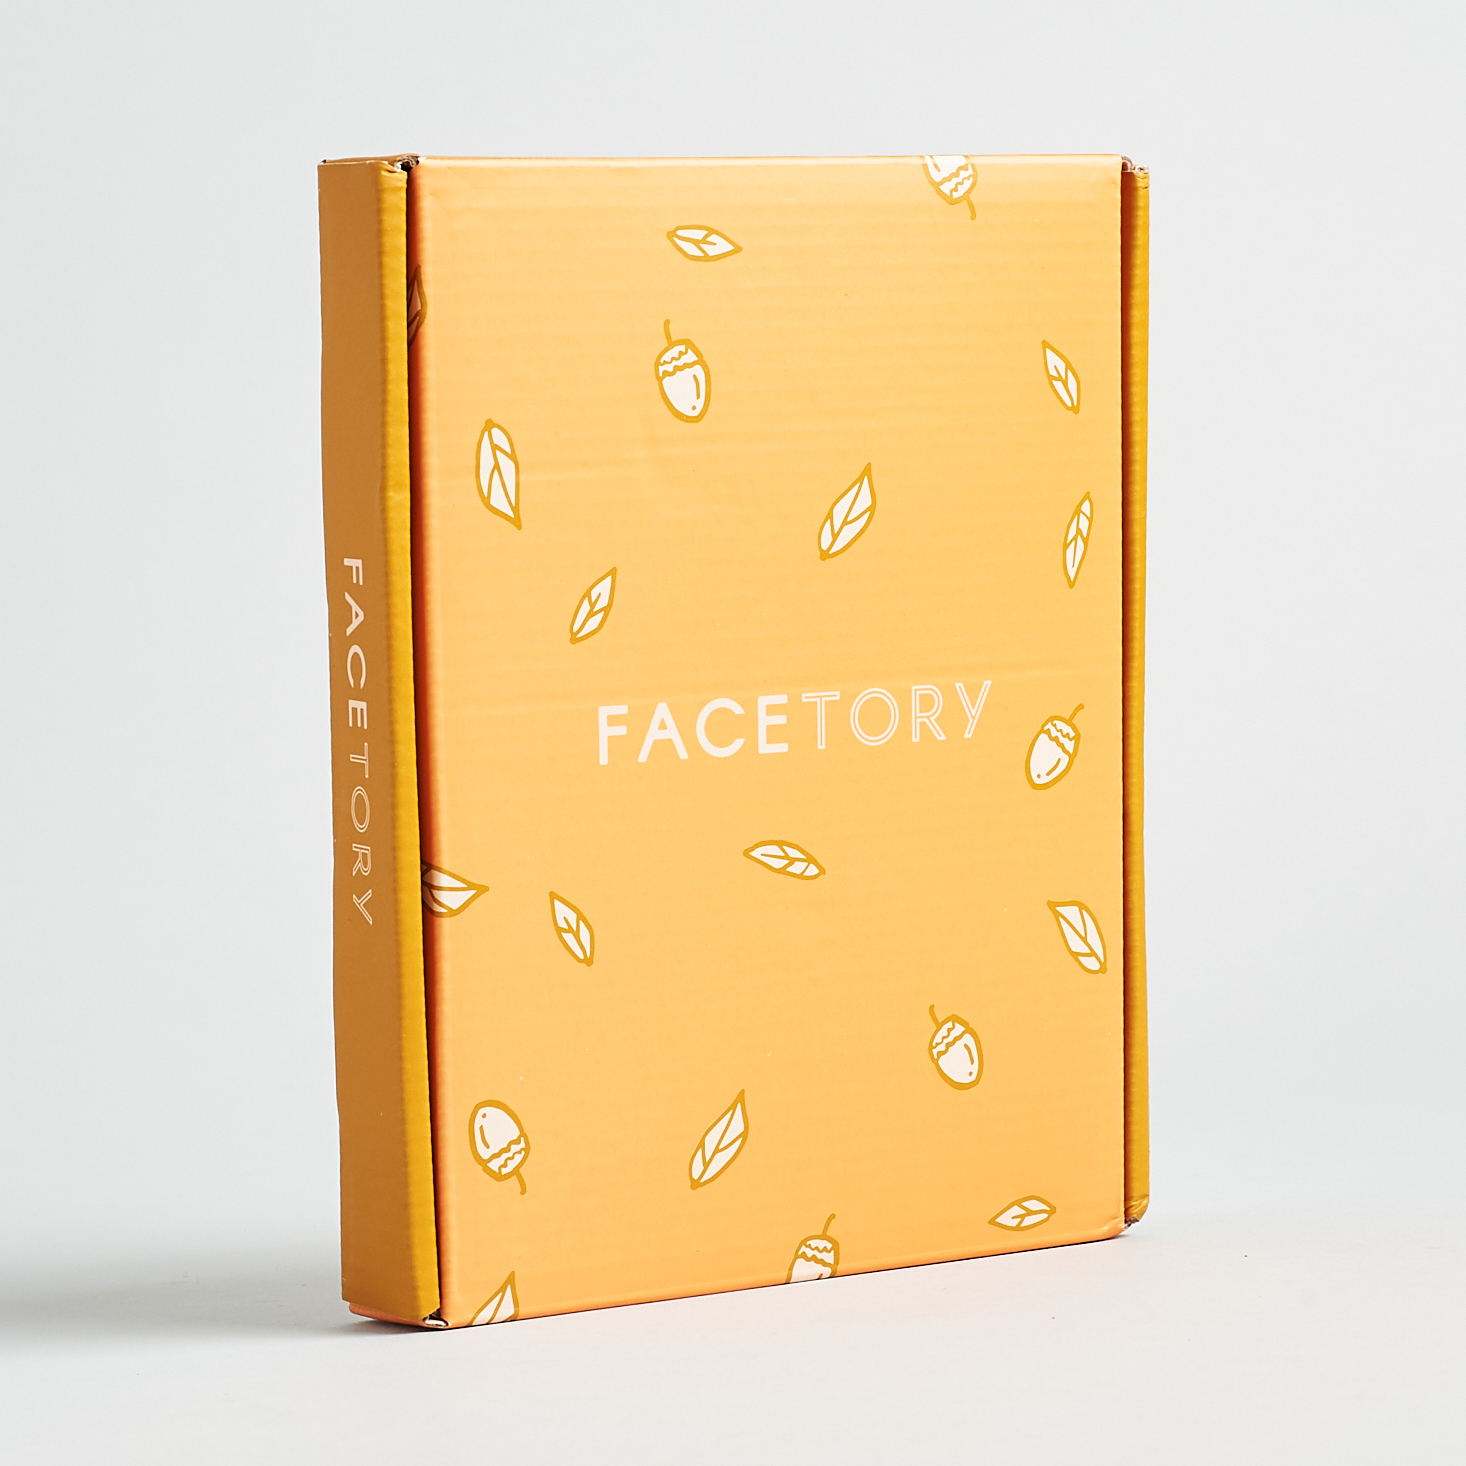 Facetory 7 Lux Box March 2020 Spoilers Round 2 Coupon Msa